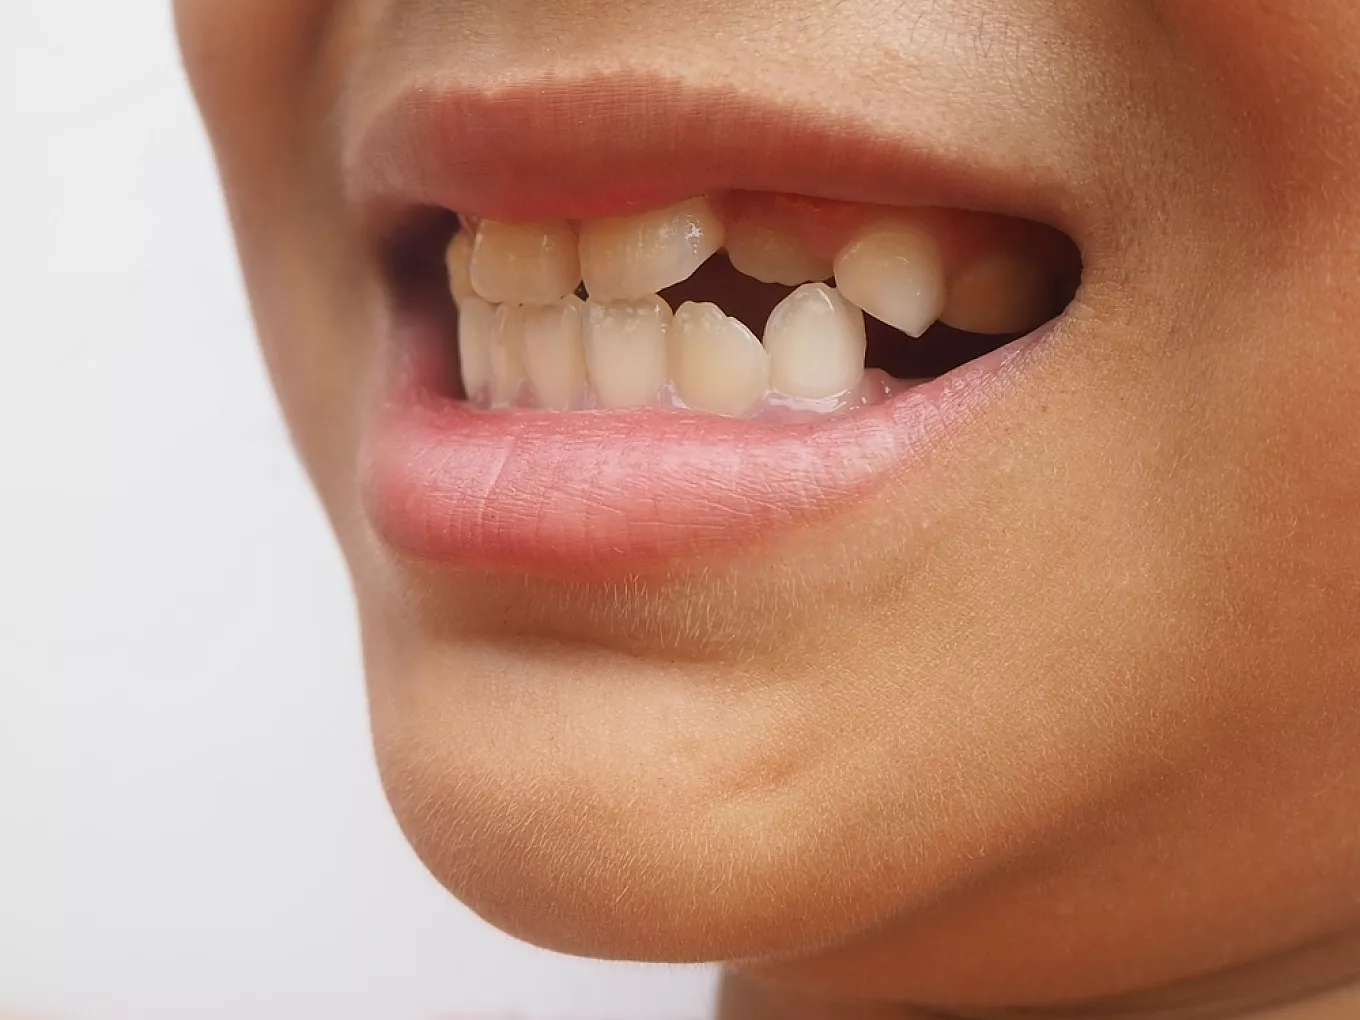 Orthodontists Address Issues Related to Missing or Extra Teeth